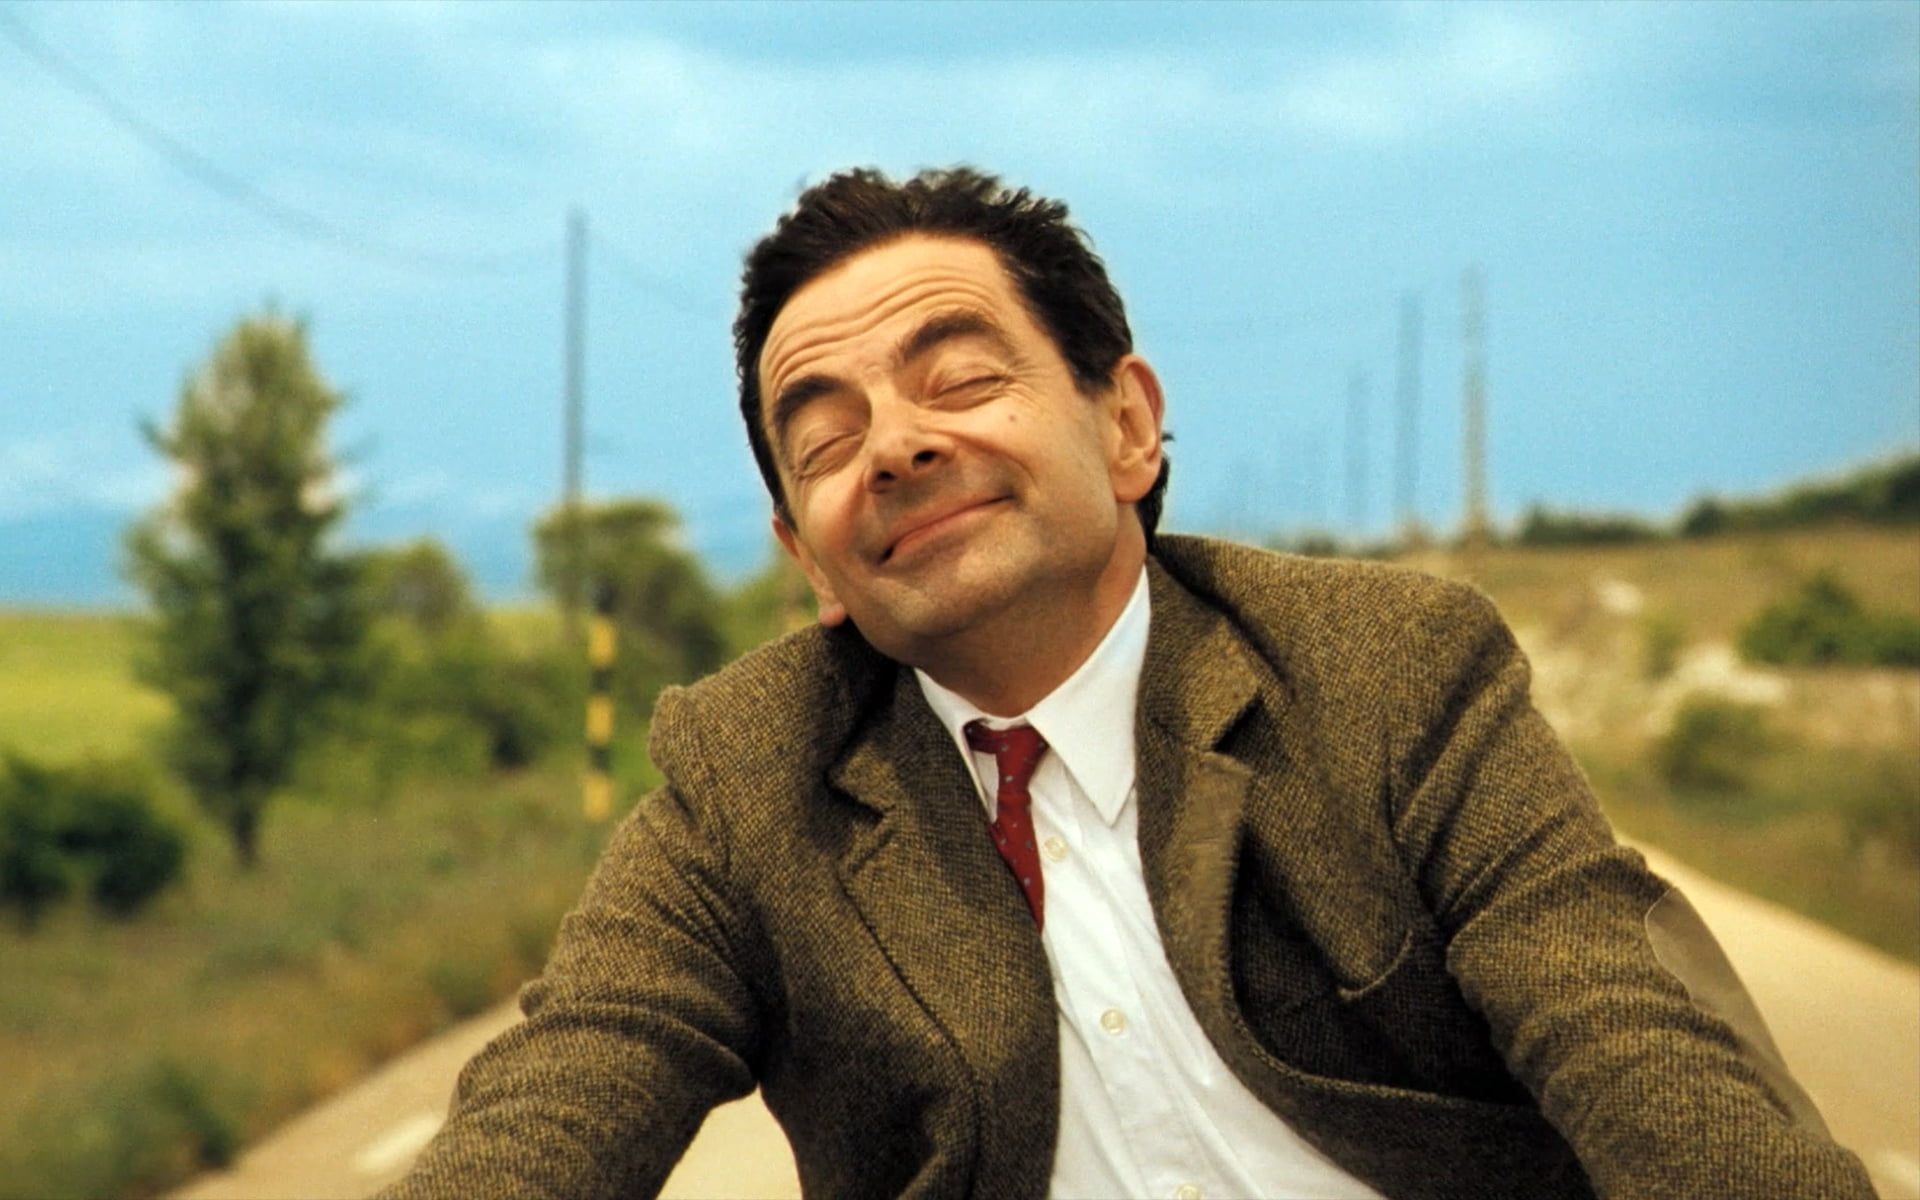 Rowan Atkinson: Appeared at the 2012 Summer Olympics opening ceremony in London as Mr. Bean. 1920x1200 HD Background.